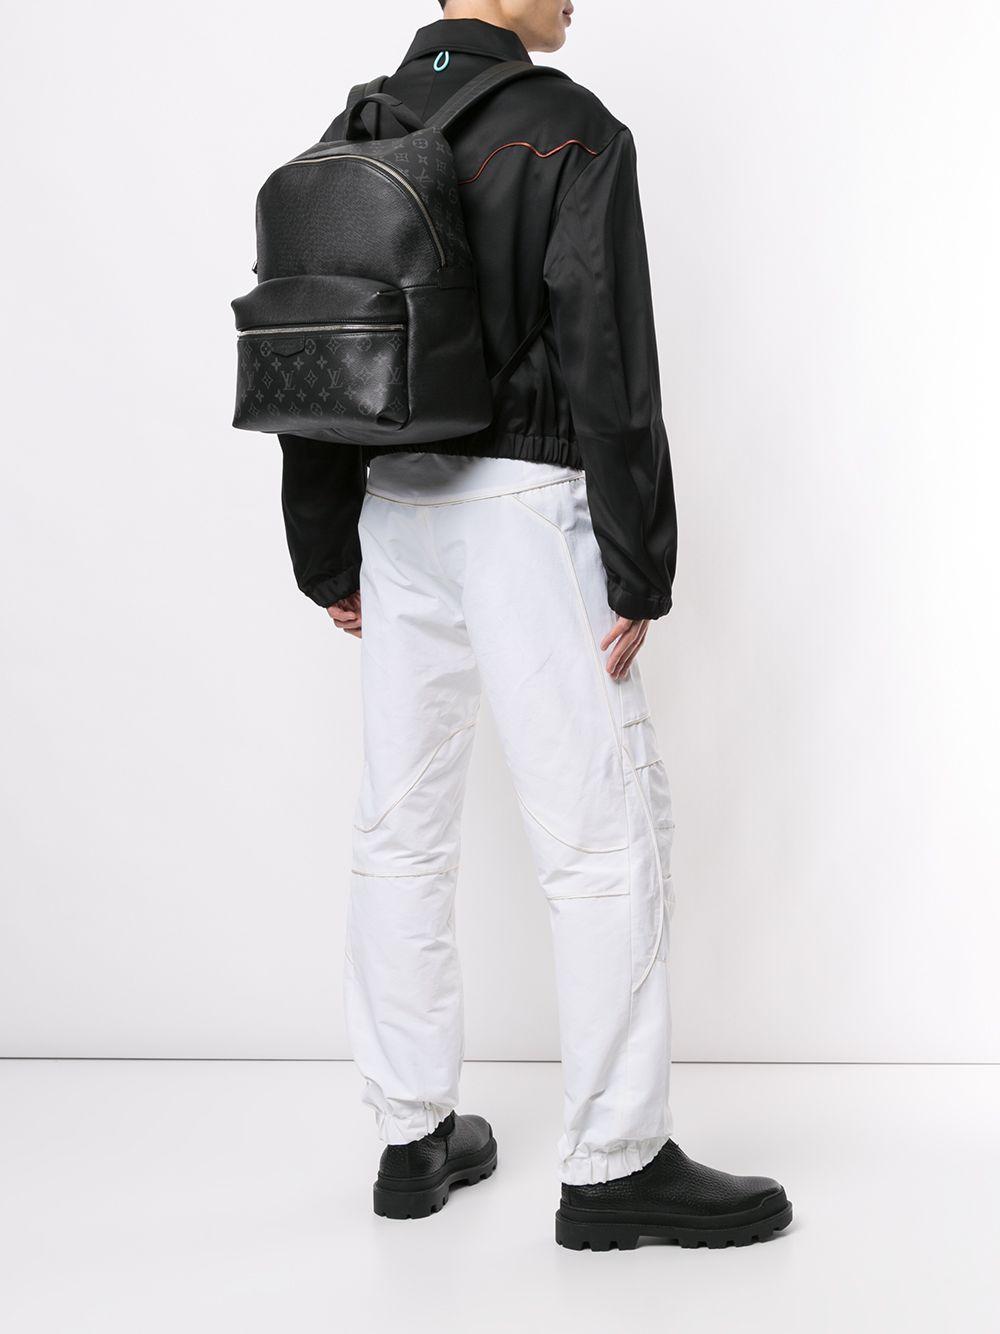 Louis Vuitton - Discovery Backpack - Leather - Anthracite Grey - Men - Luxury